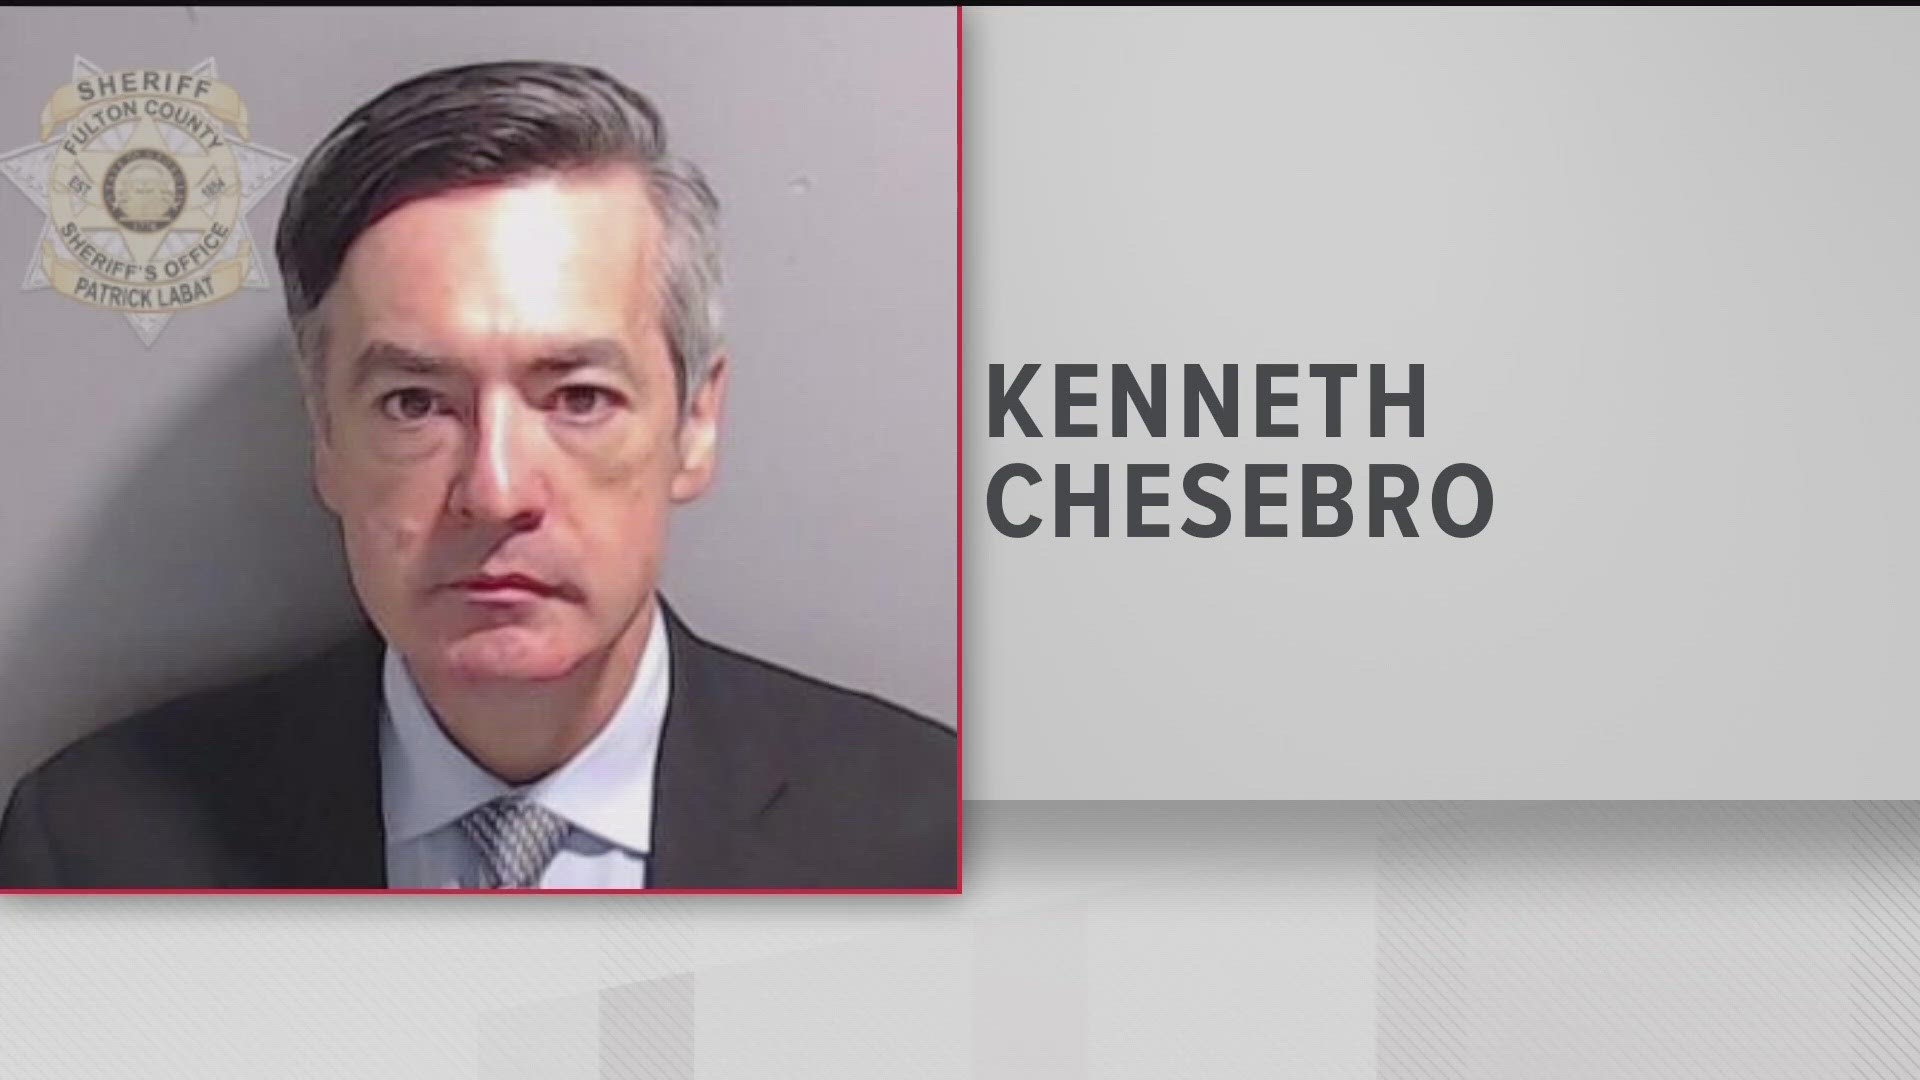 Kenneth Chesebro is the first of 19 defendants that will go to trial as part of Fulton County's election interference case.